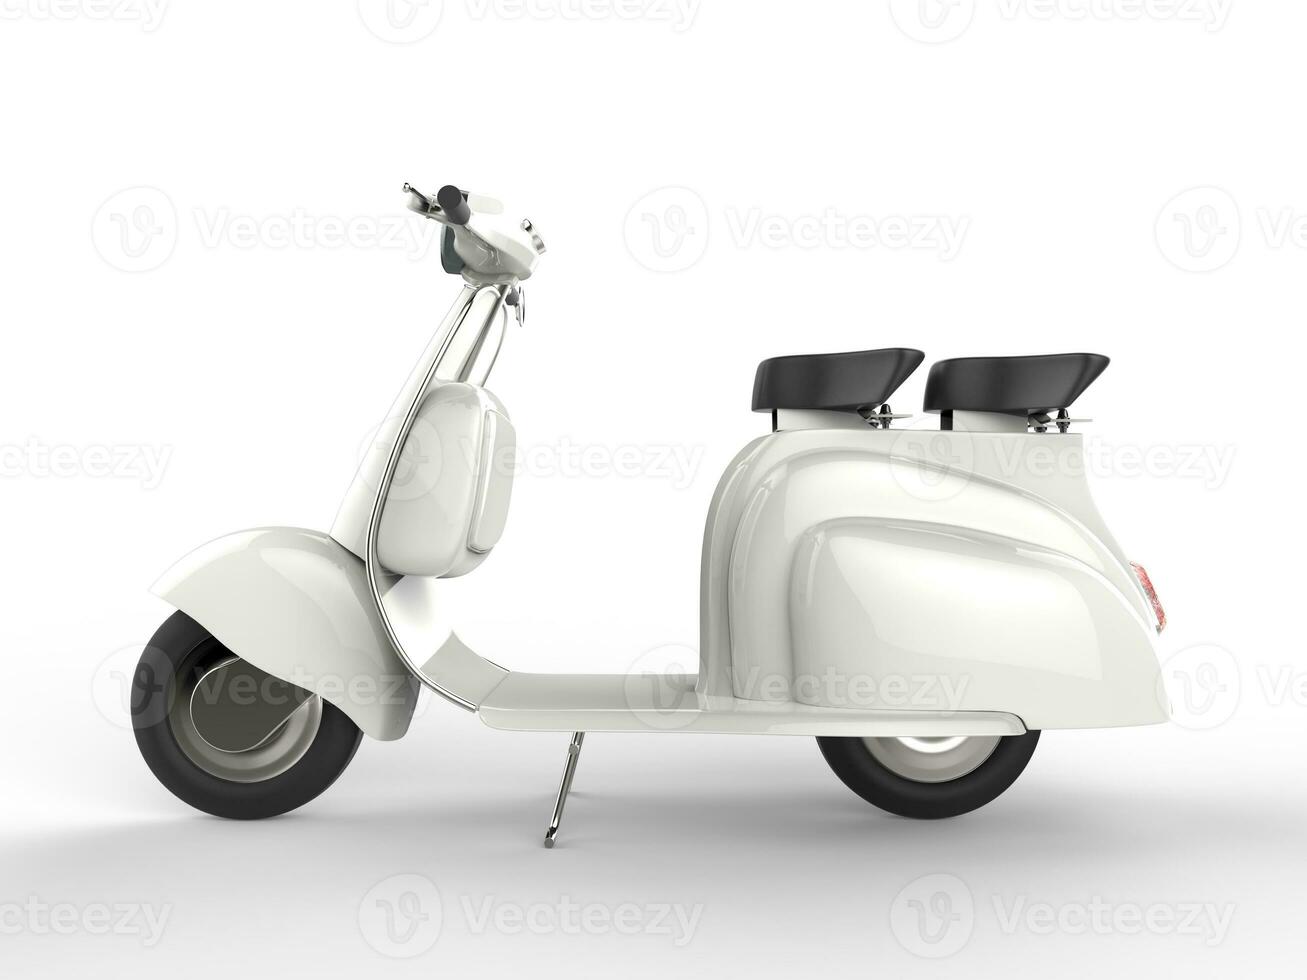 Snow white moped - side view photo